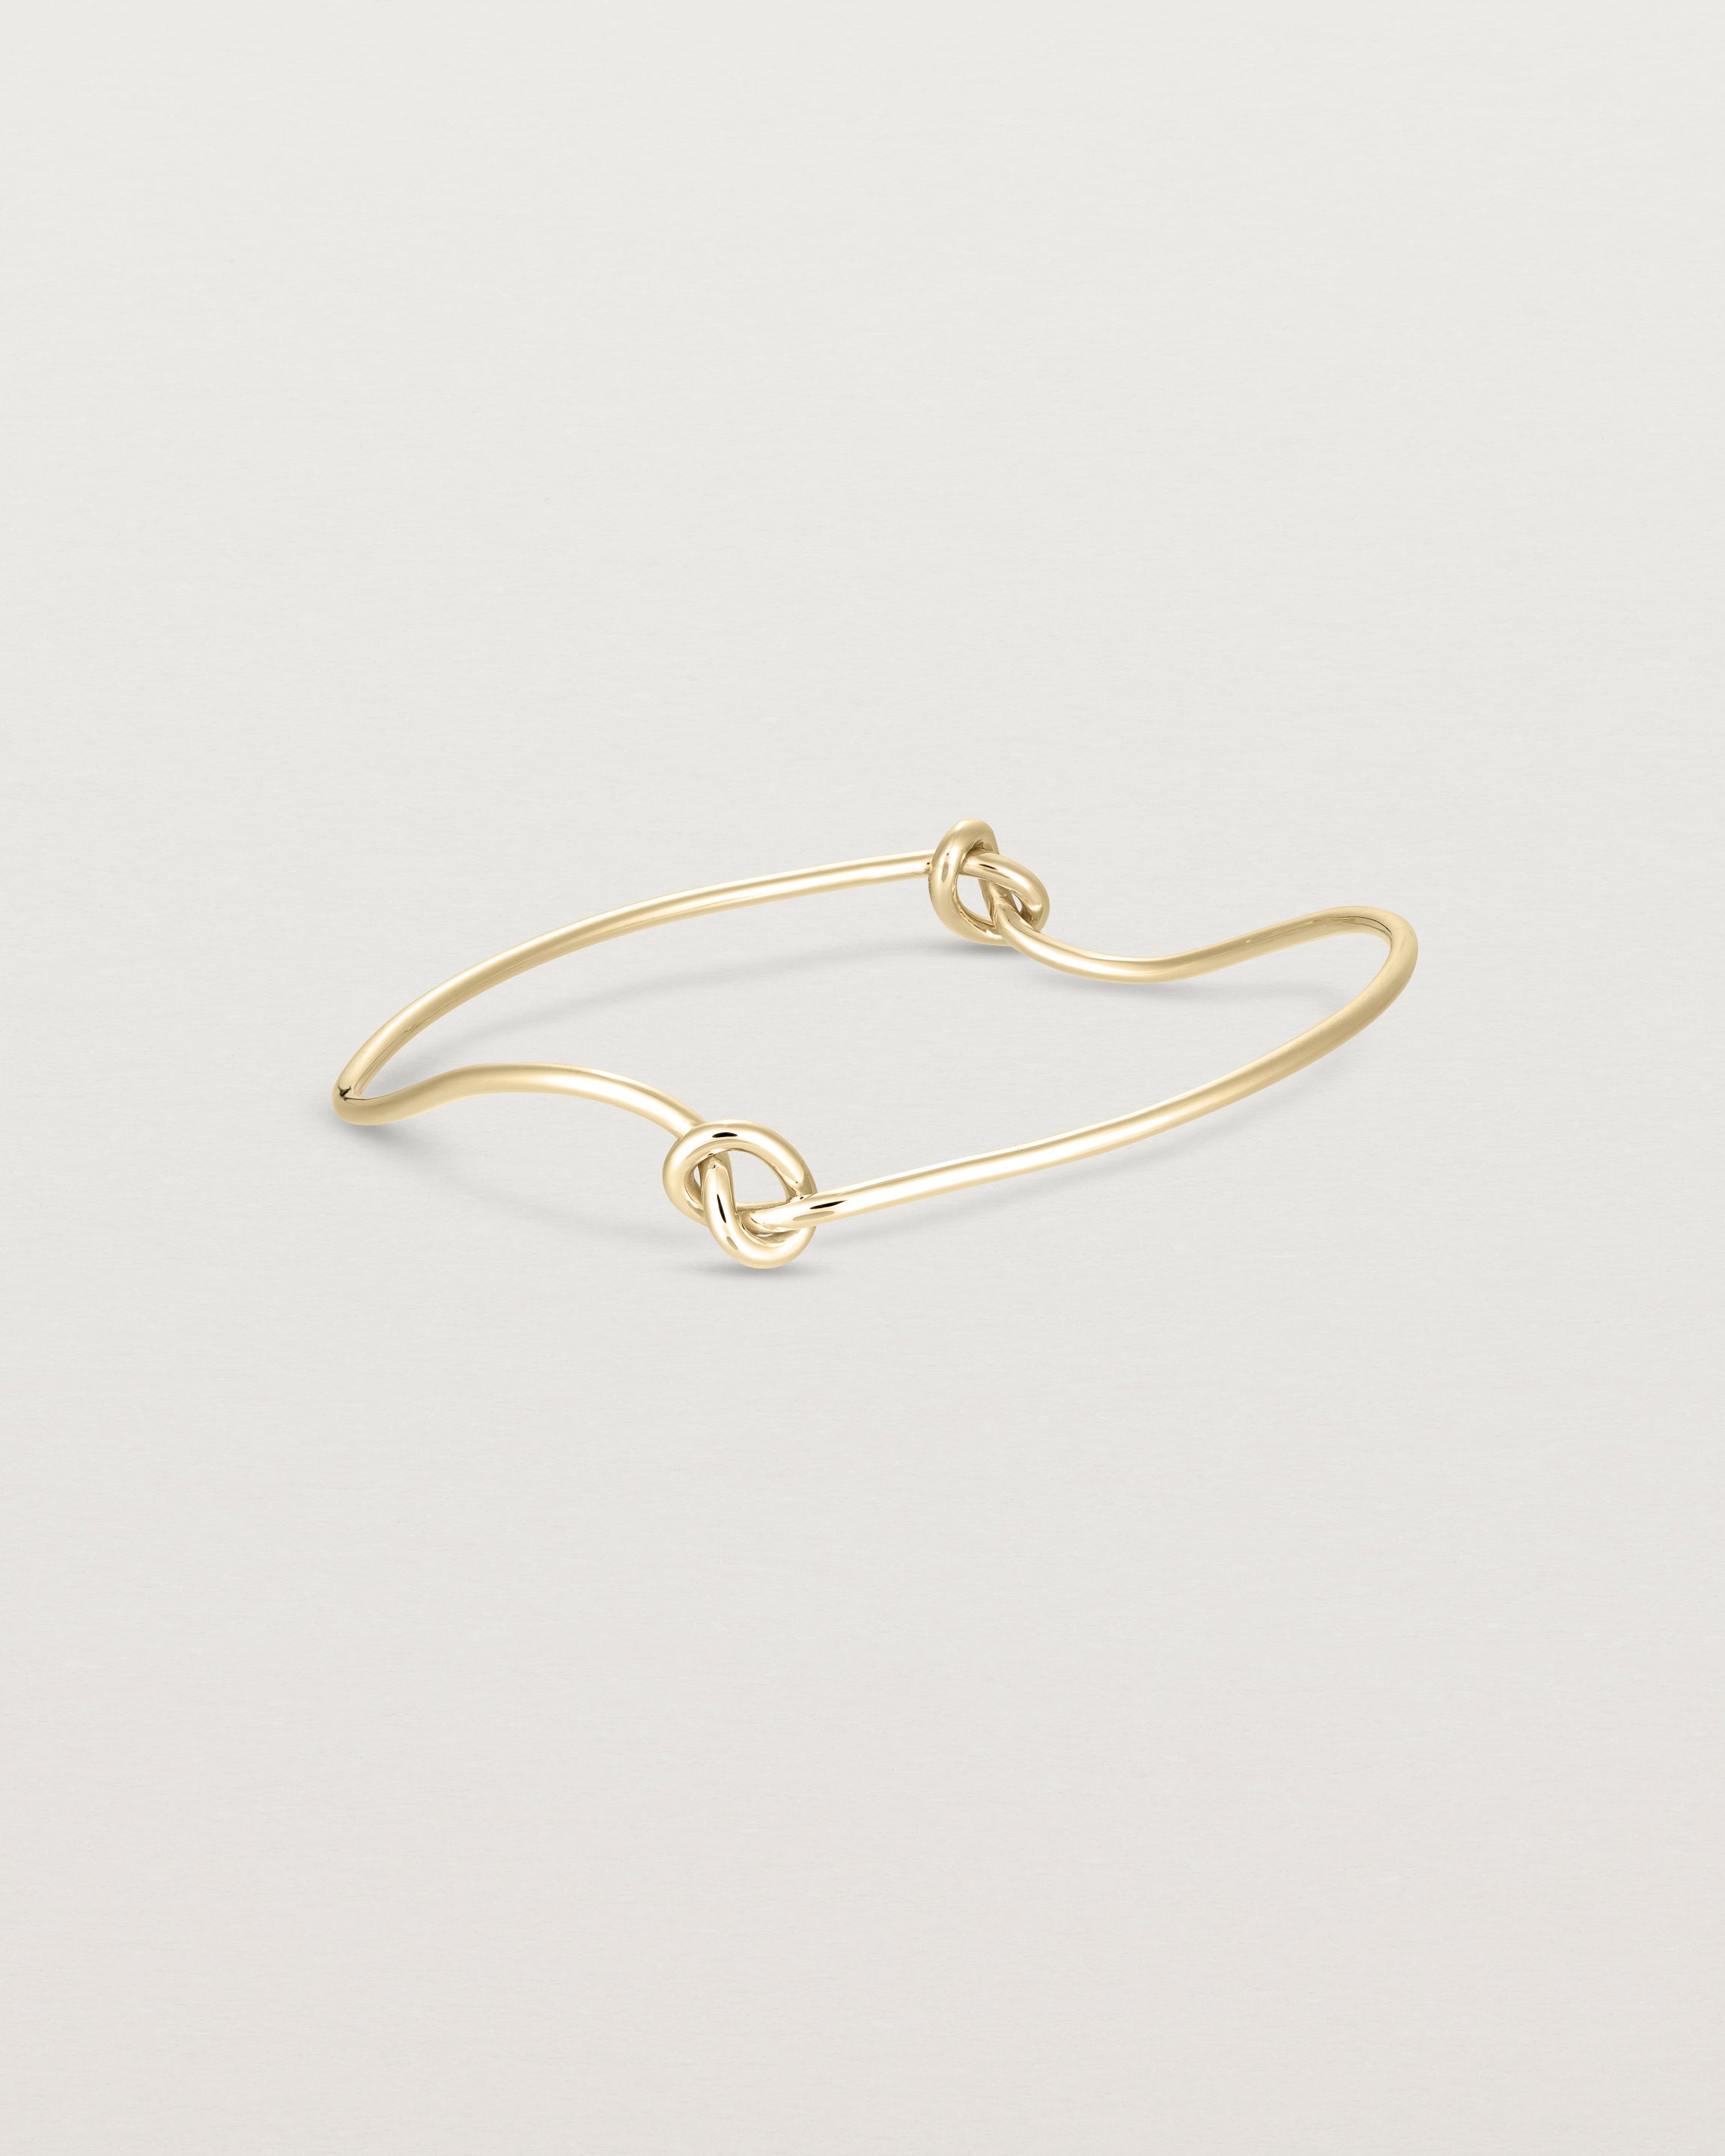 Front view of the Dà anam Bangle in yellow gold.